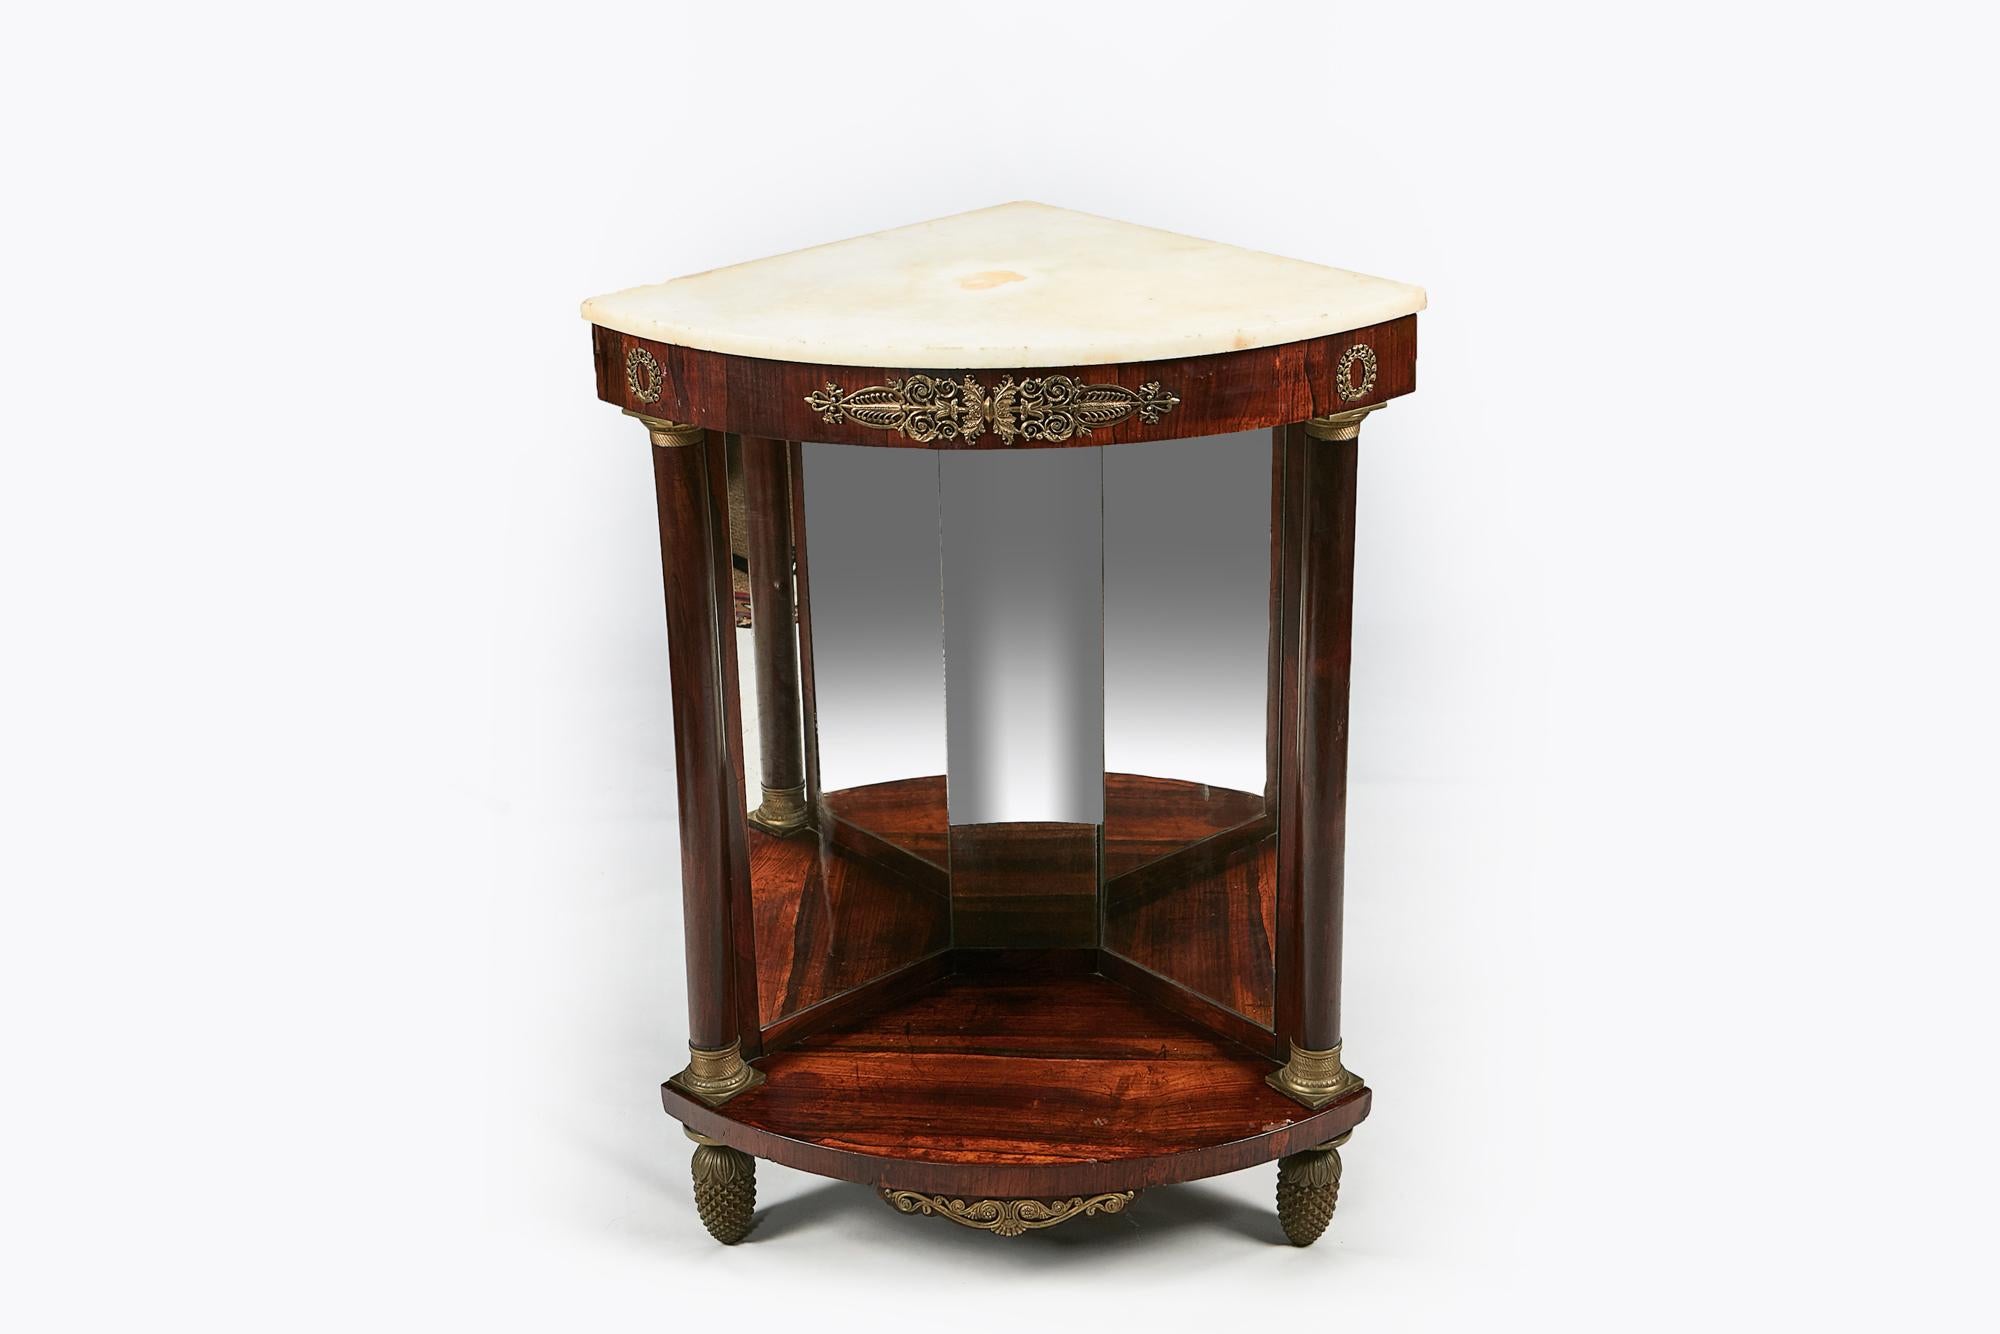 Early 19th century Empire pair of mahogany marble topped corner console tables, the statuary marble top supported by bowfront apron with centred medallion ormolu filigree flanked with ormolu laurel wreath mounts raised over mirrored panel flanked